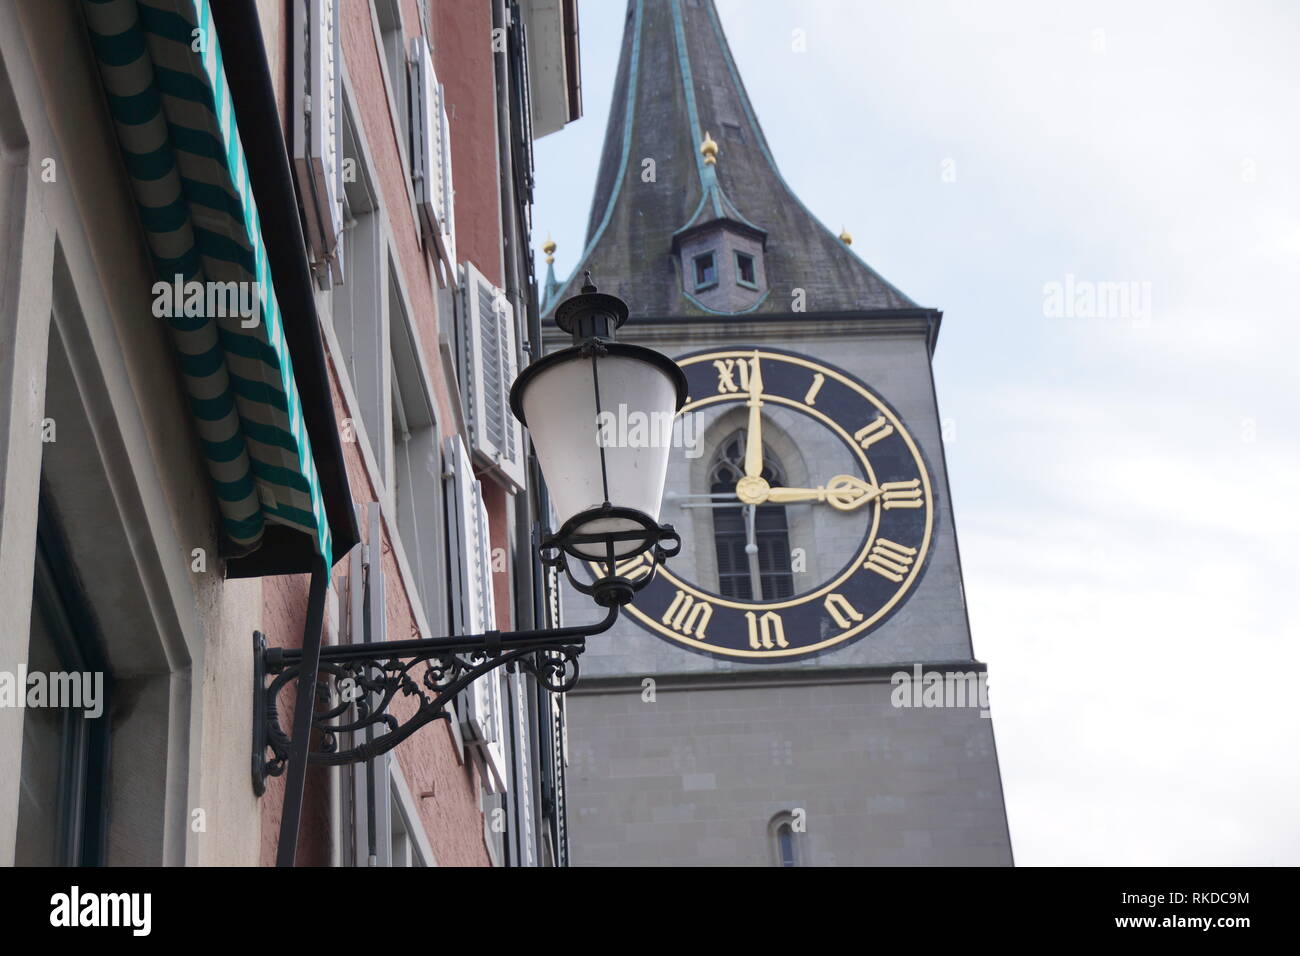 Street lamps of Europe Zurich Stock Photo